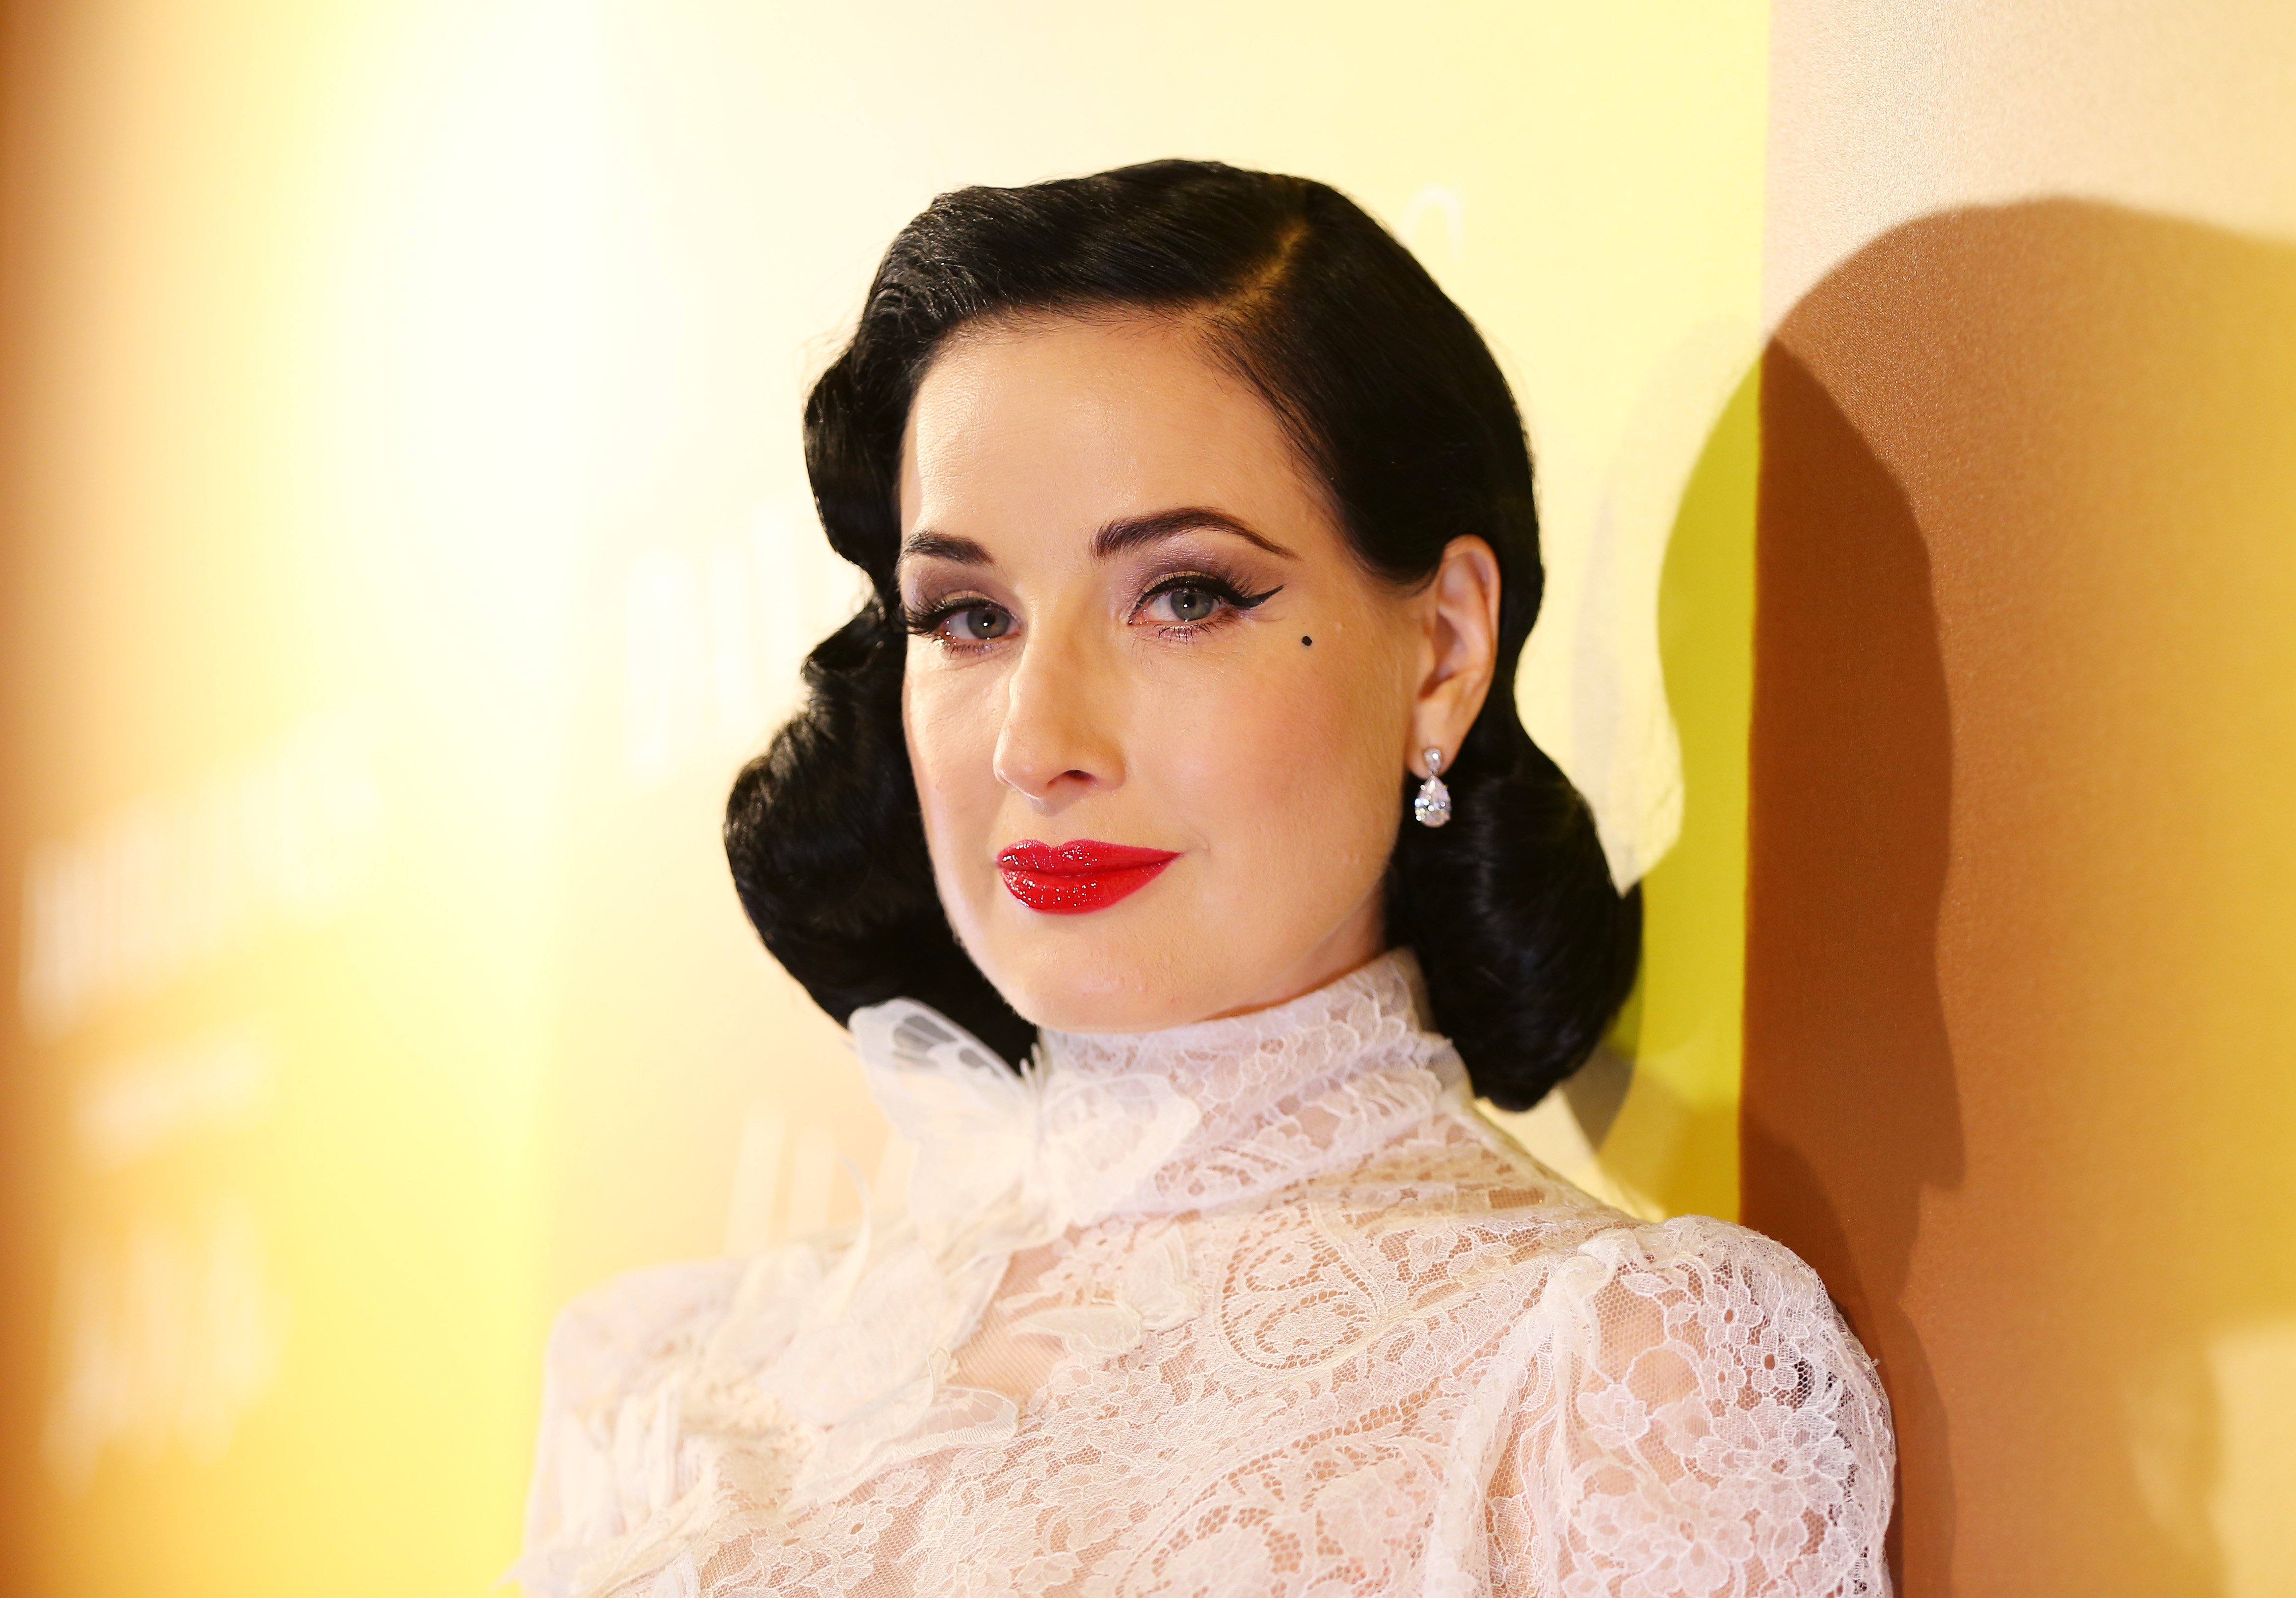 Dita Von Teese at the launch of David Jones Luxury Beauty and Designer Accessories on December 10, 2019 | Source: Getty Images